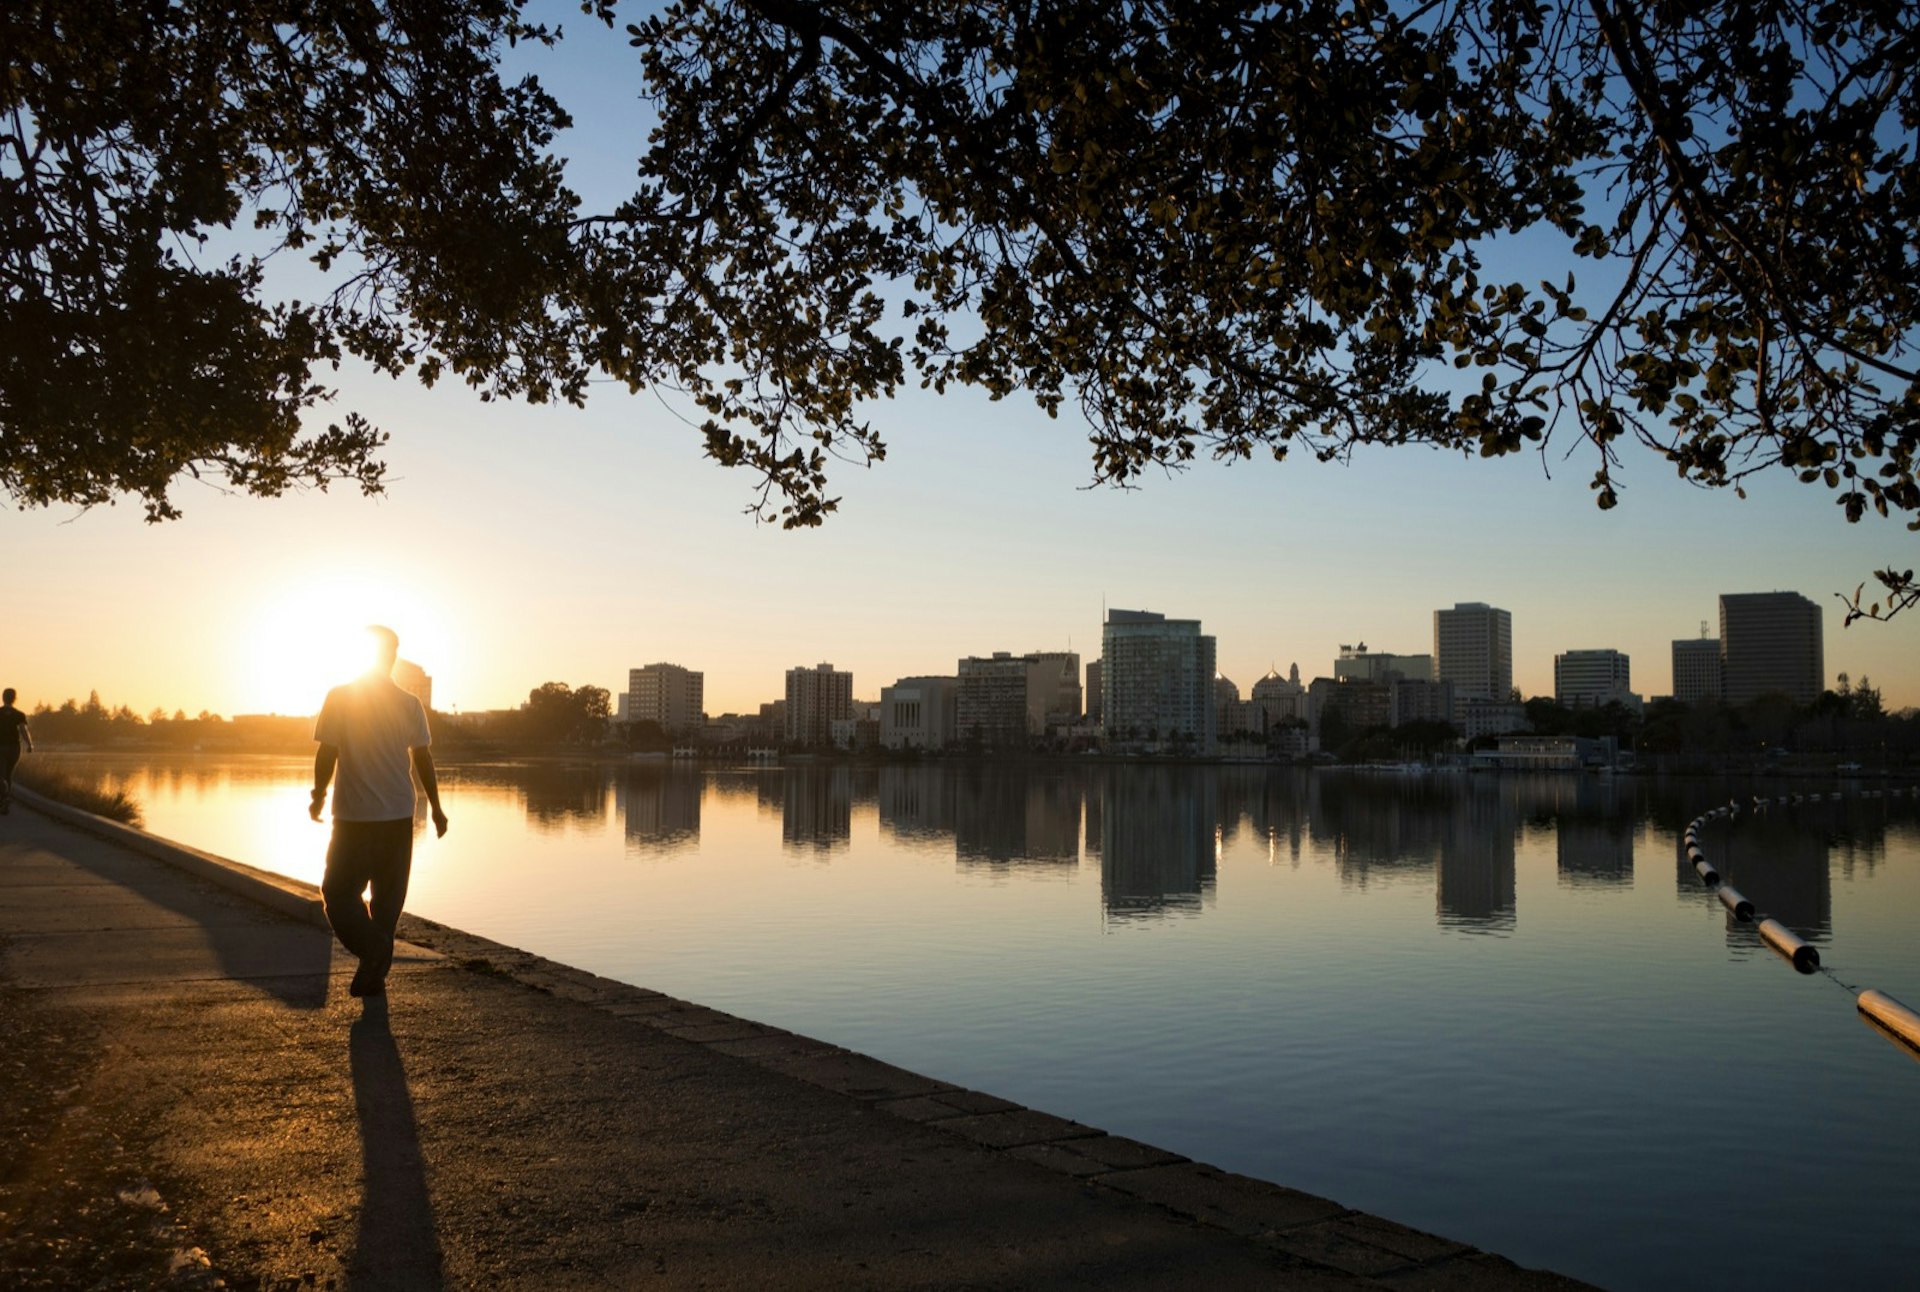 The sun is setting over a lake behind the Oakland skyline which is reflected in the lake a man is walking around